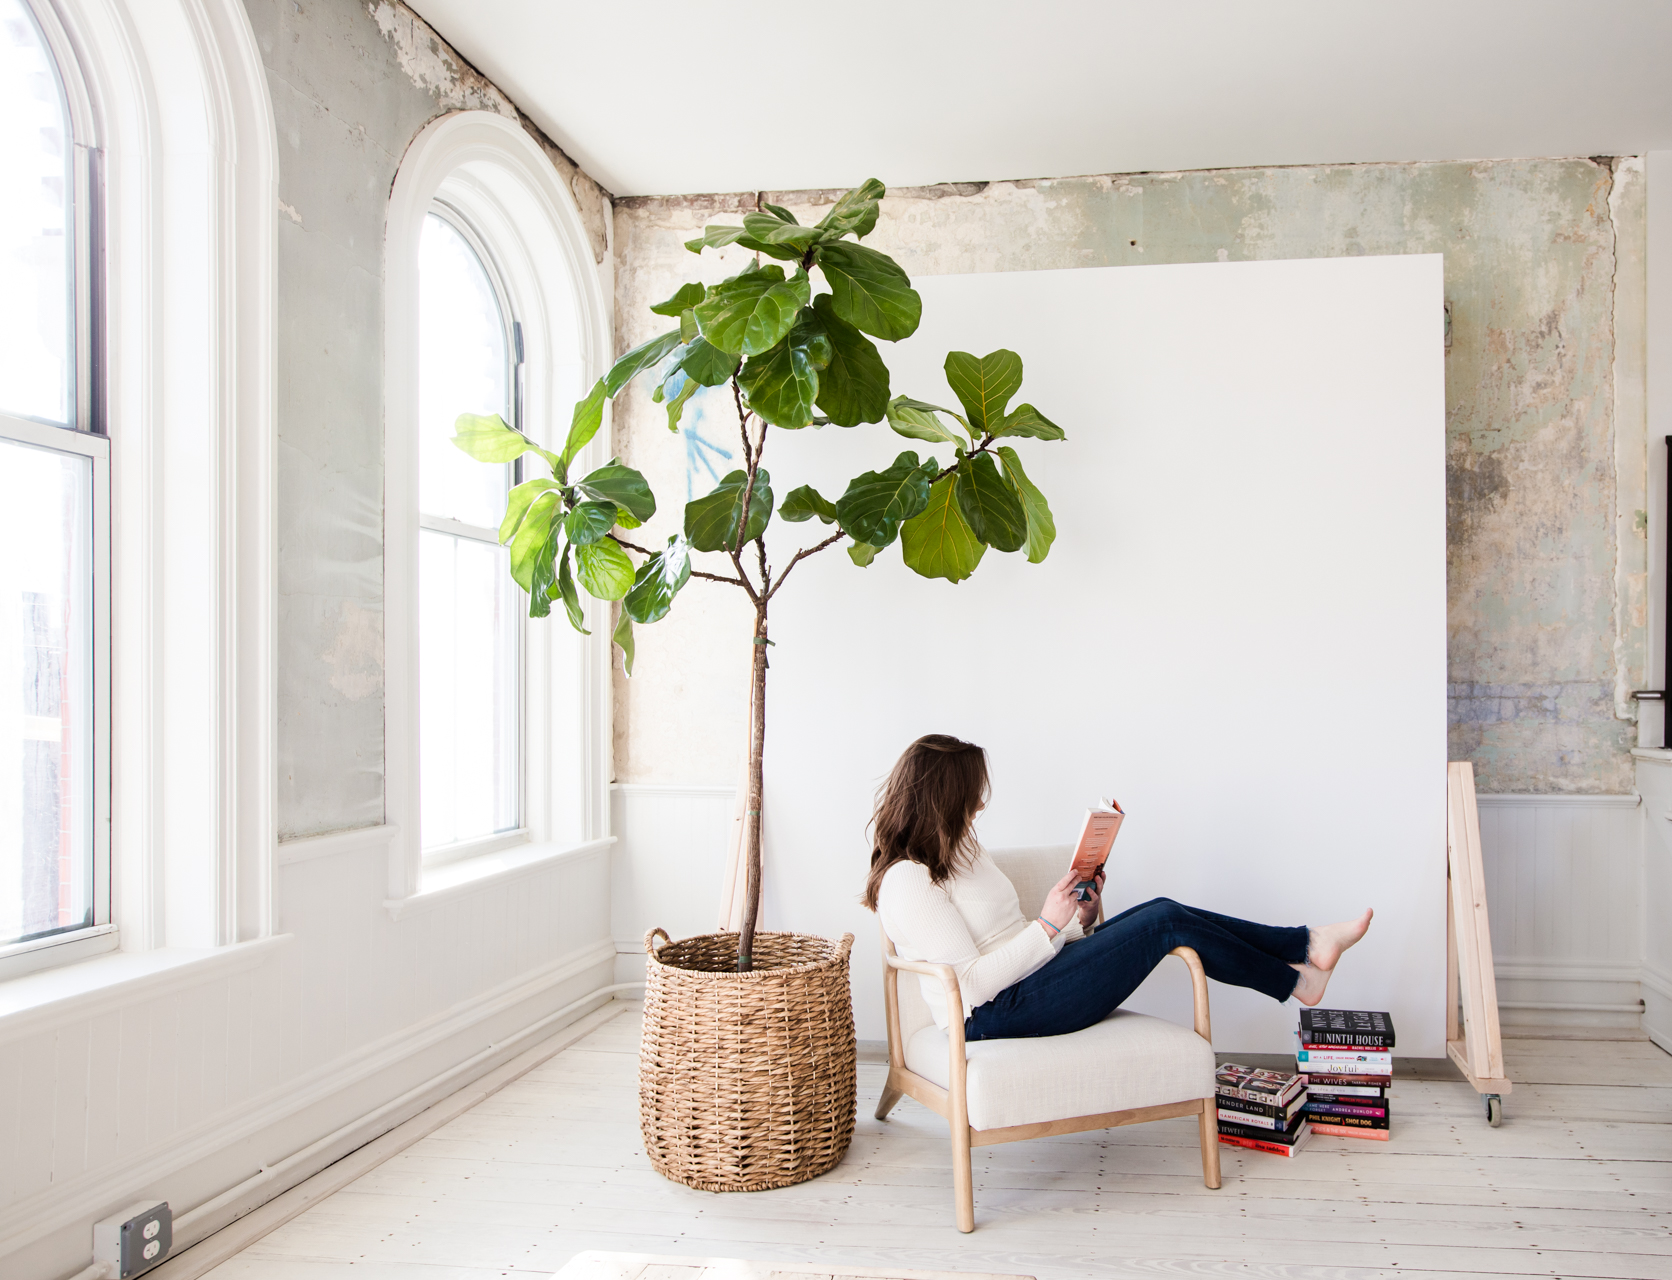 March & April Reading + Wine Pairing List | April Reading List by popular New England lifestyle blogger, Shannon Shipman: image of a woman reading a book in a white arm chair next to a fiddle leaf fig tree and pile of books.